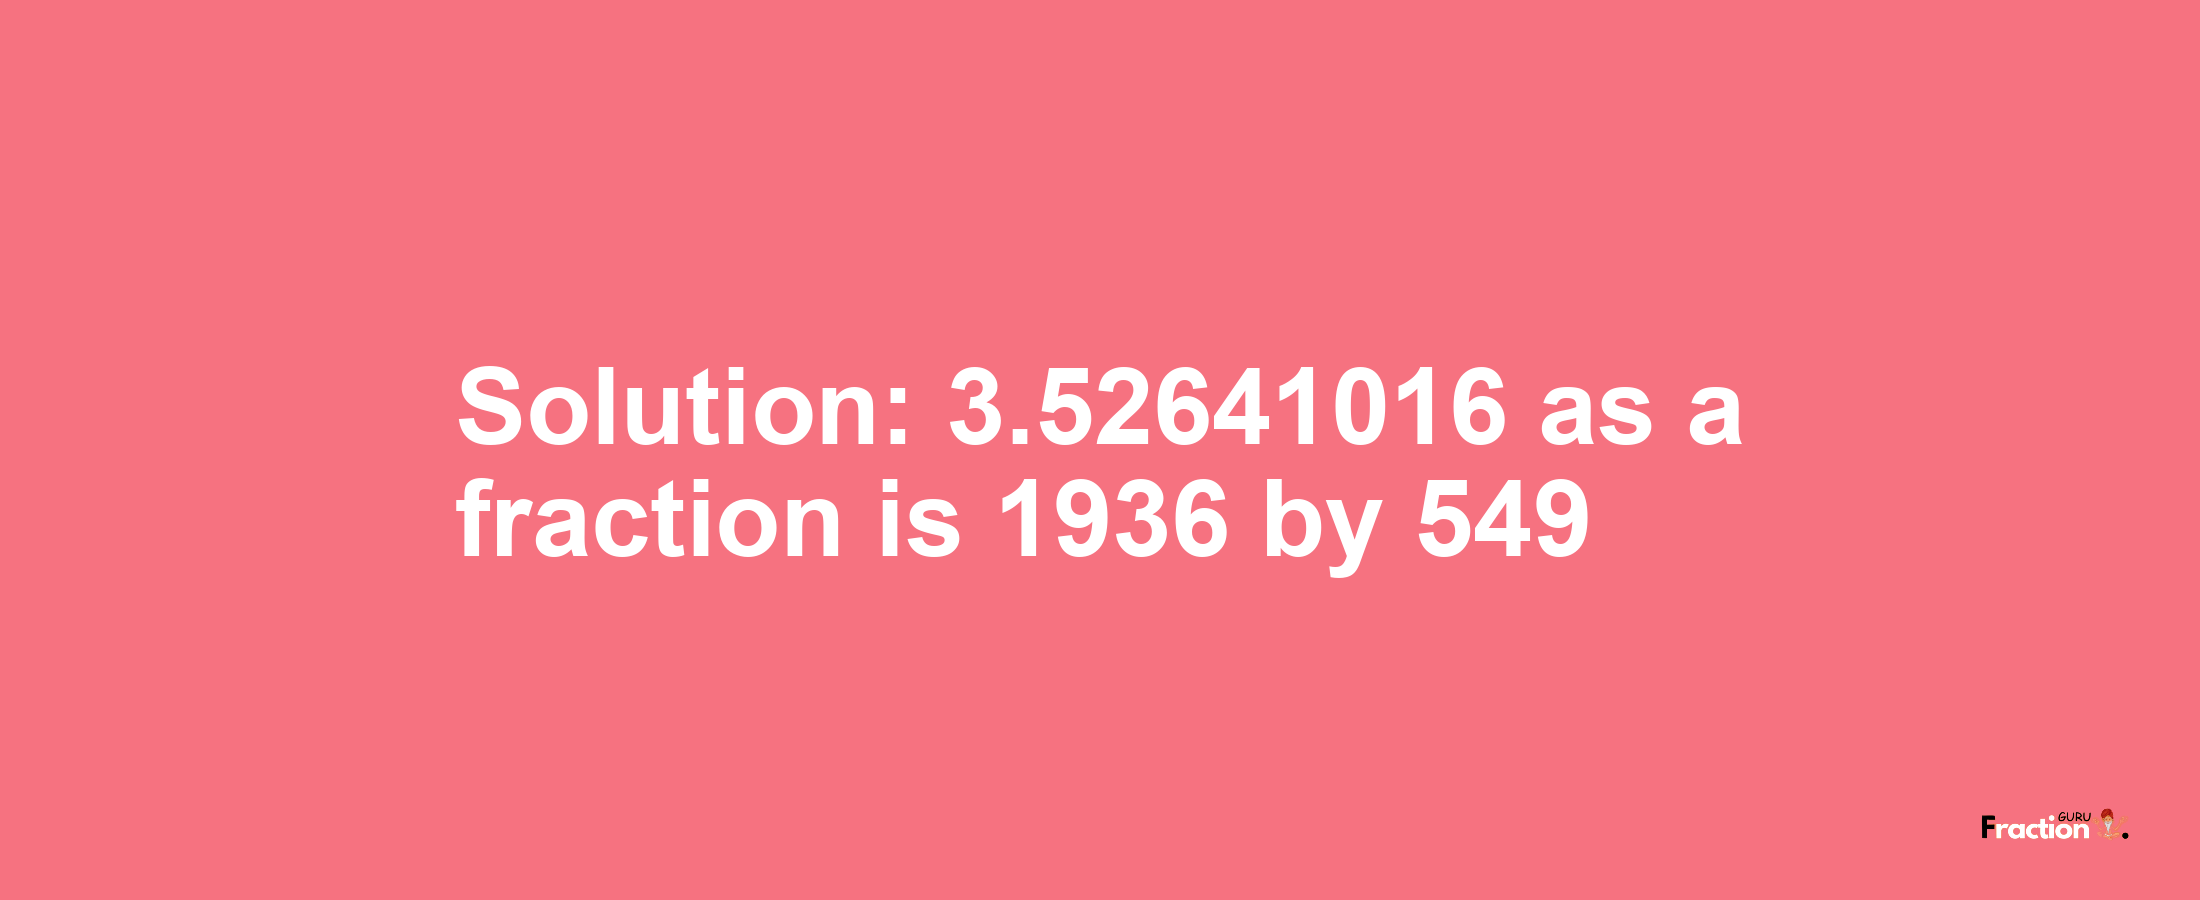 Solution:3.52641016 as a fraction is 1936/549